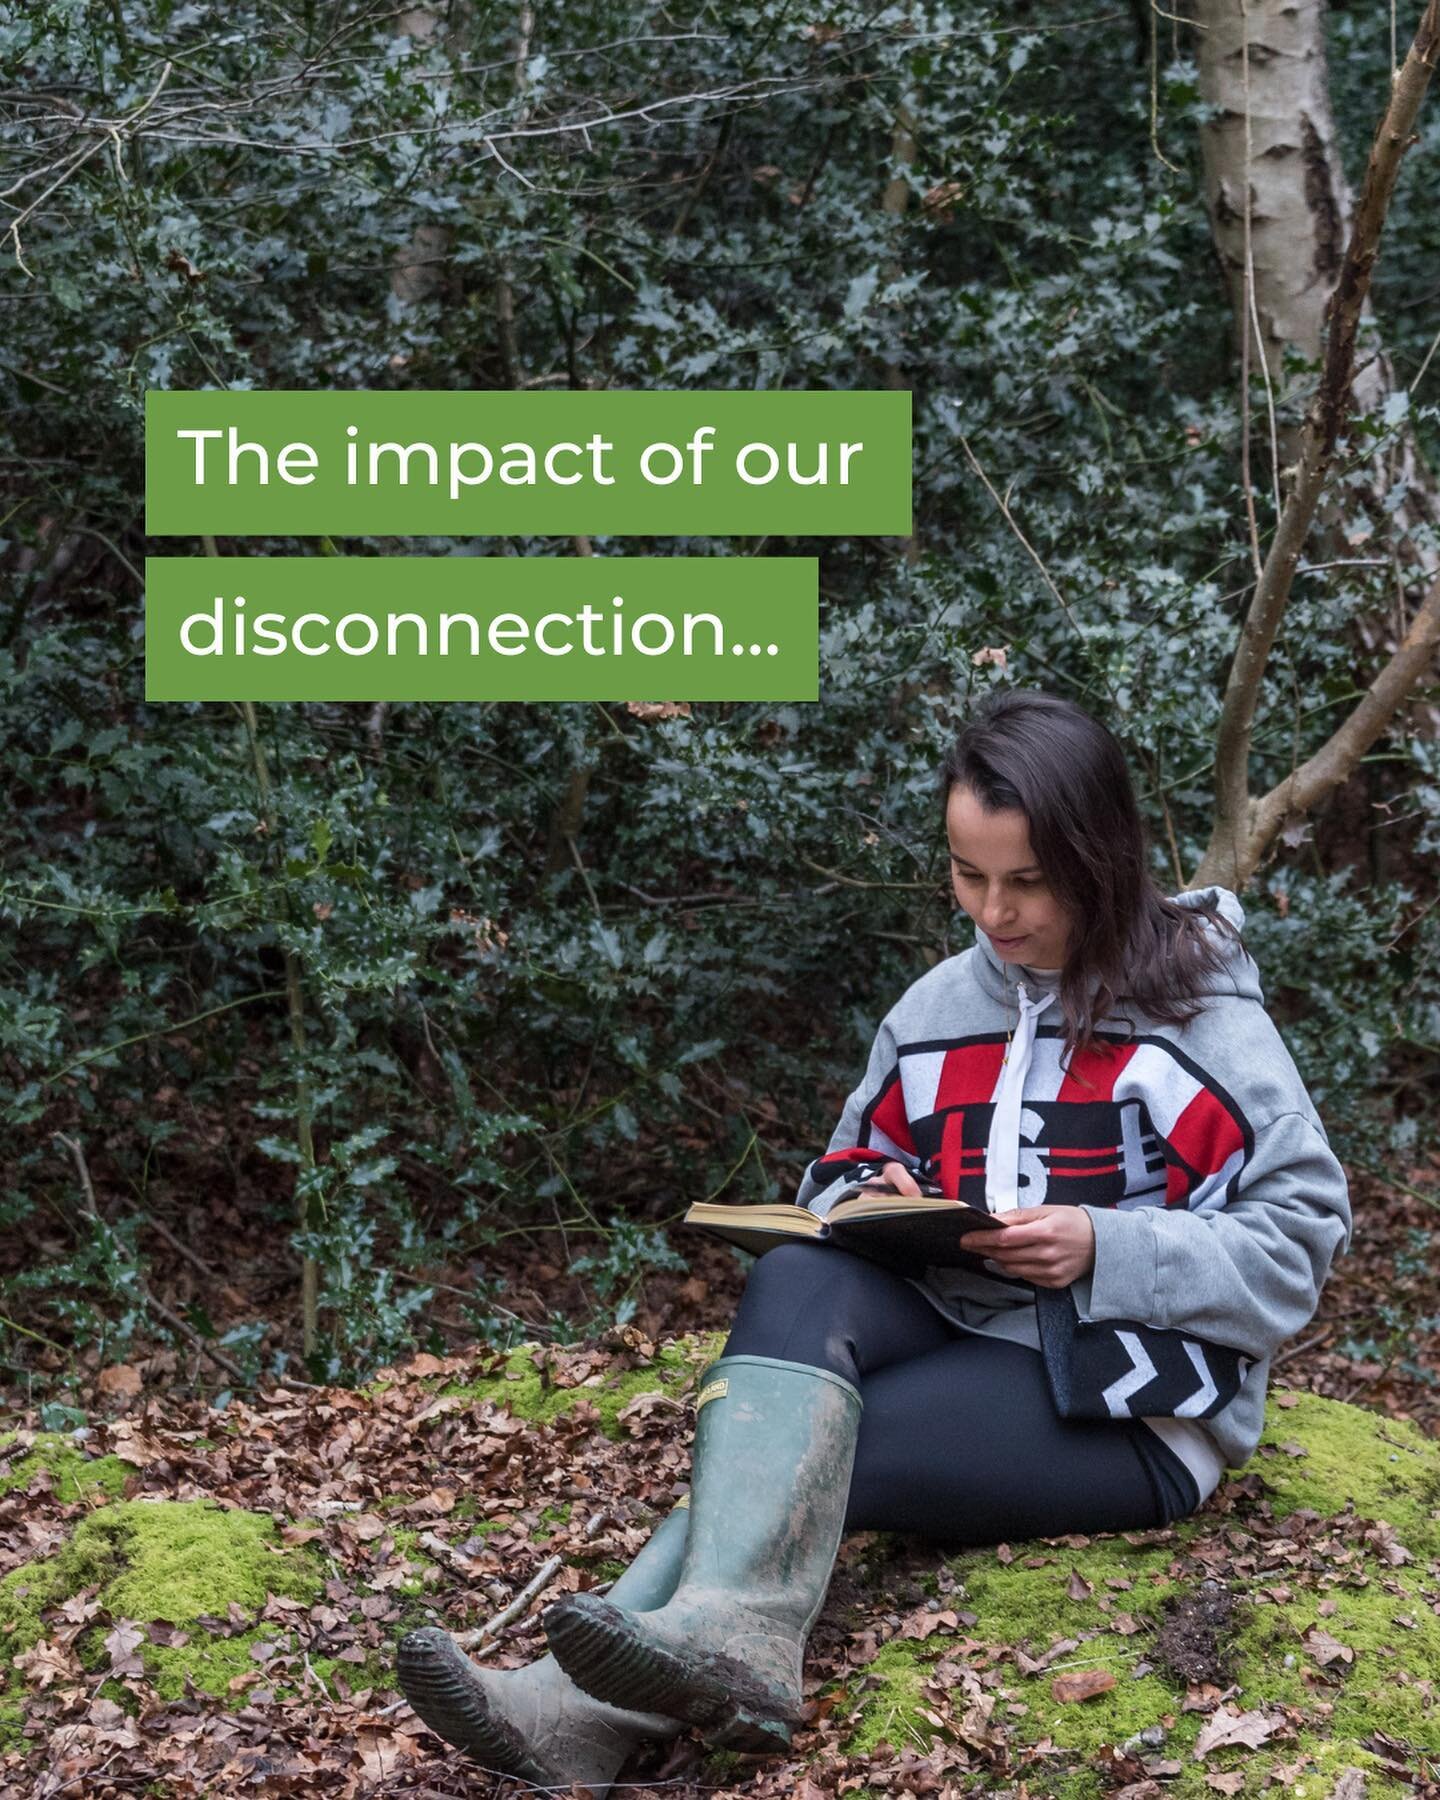 The impact of our disconnection on ourselves, those we love, our communities, and nature 🌿

We humans are social animals who, through evolution, are hard wired for CONNECTION. Yet we are facing a crisis of disconnection. 

We can often disconnect fr